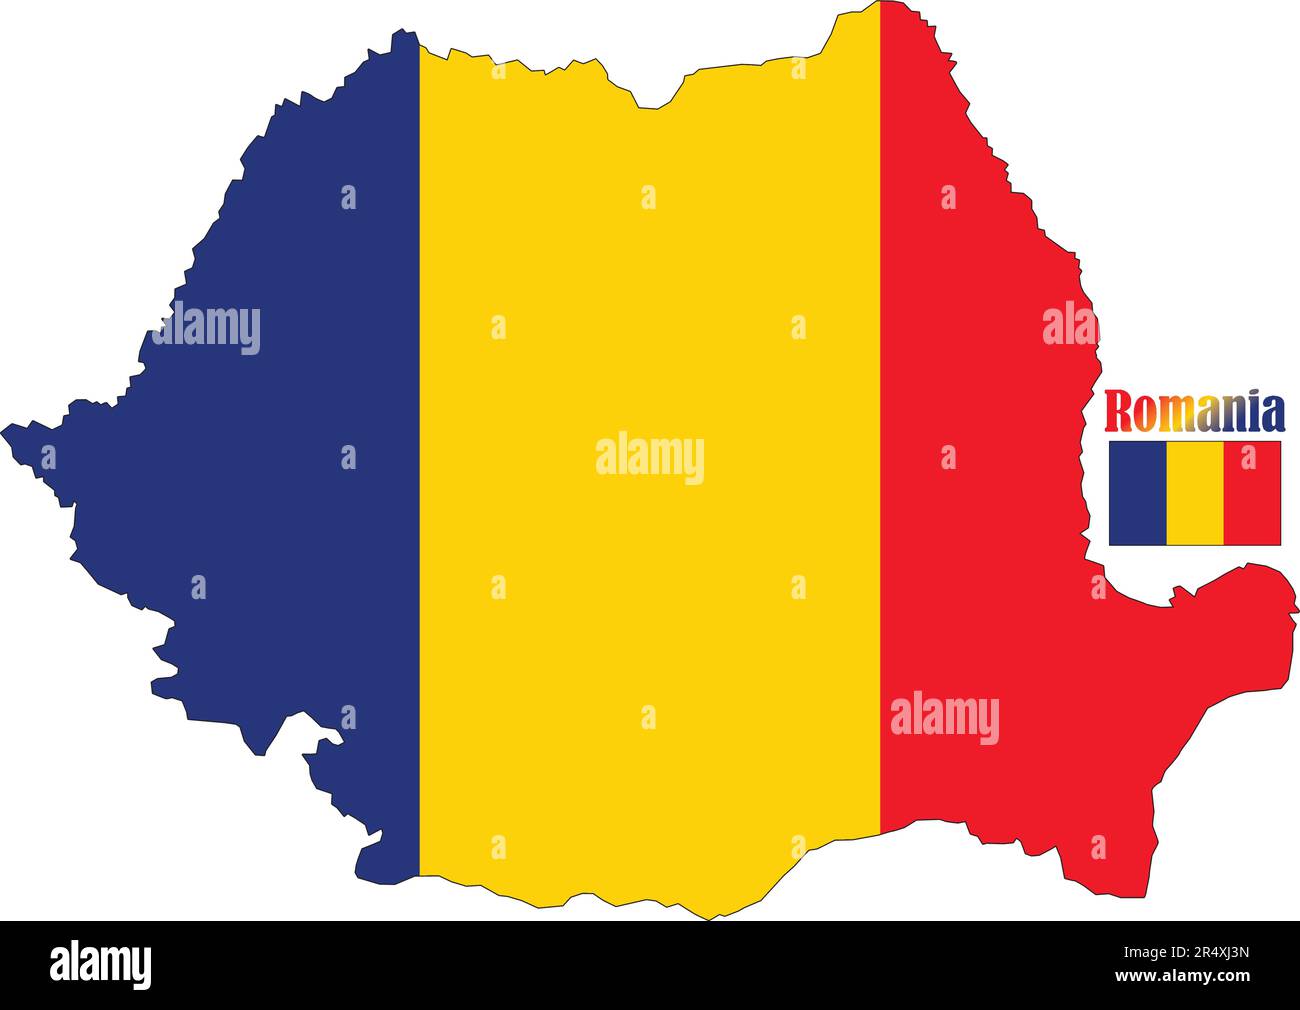 Romania Map and Flag Stock Vector